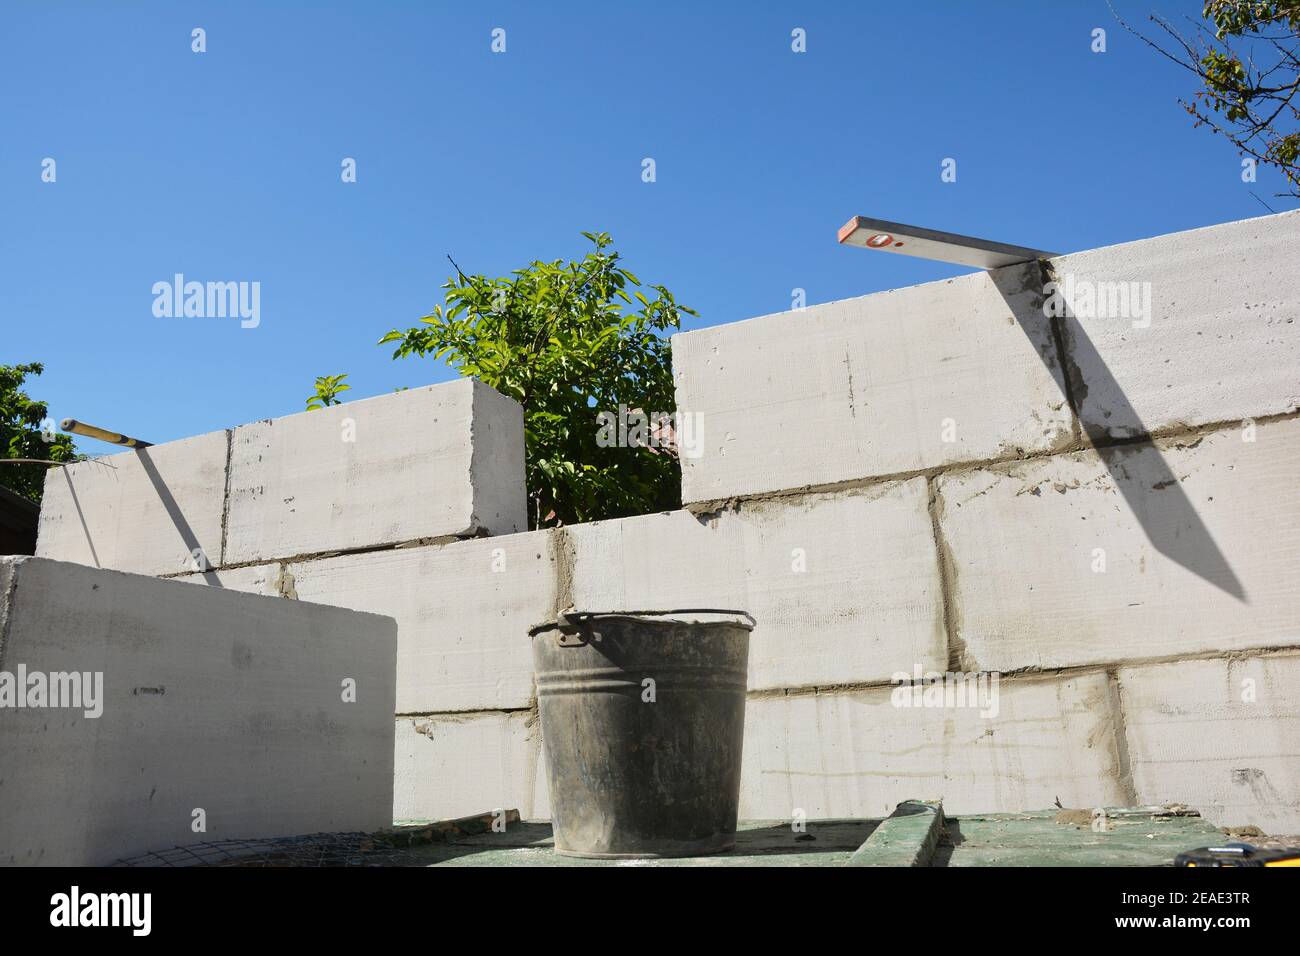 A close-up on home addition, house wall construction from autoclaved aerated concrete blocks using a trowel, mortar in a bucket and spirit level. Stock Photo